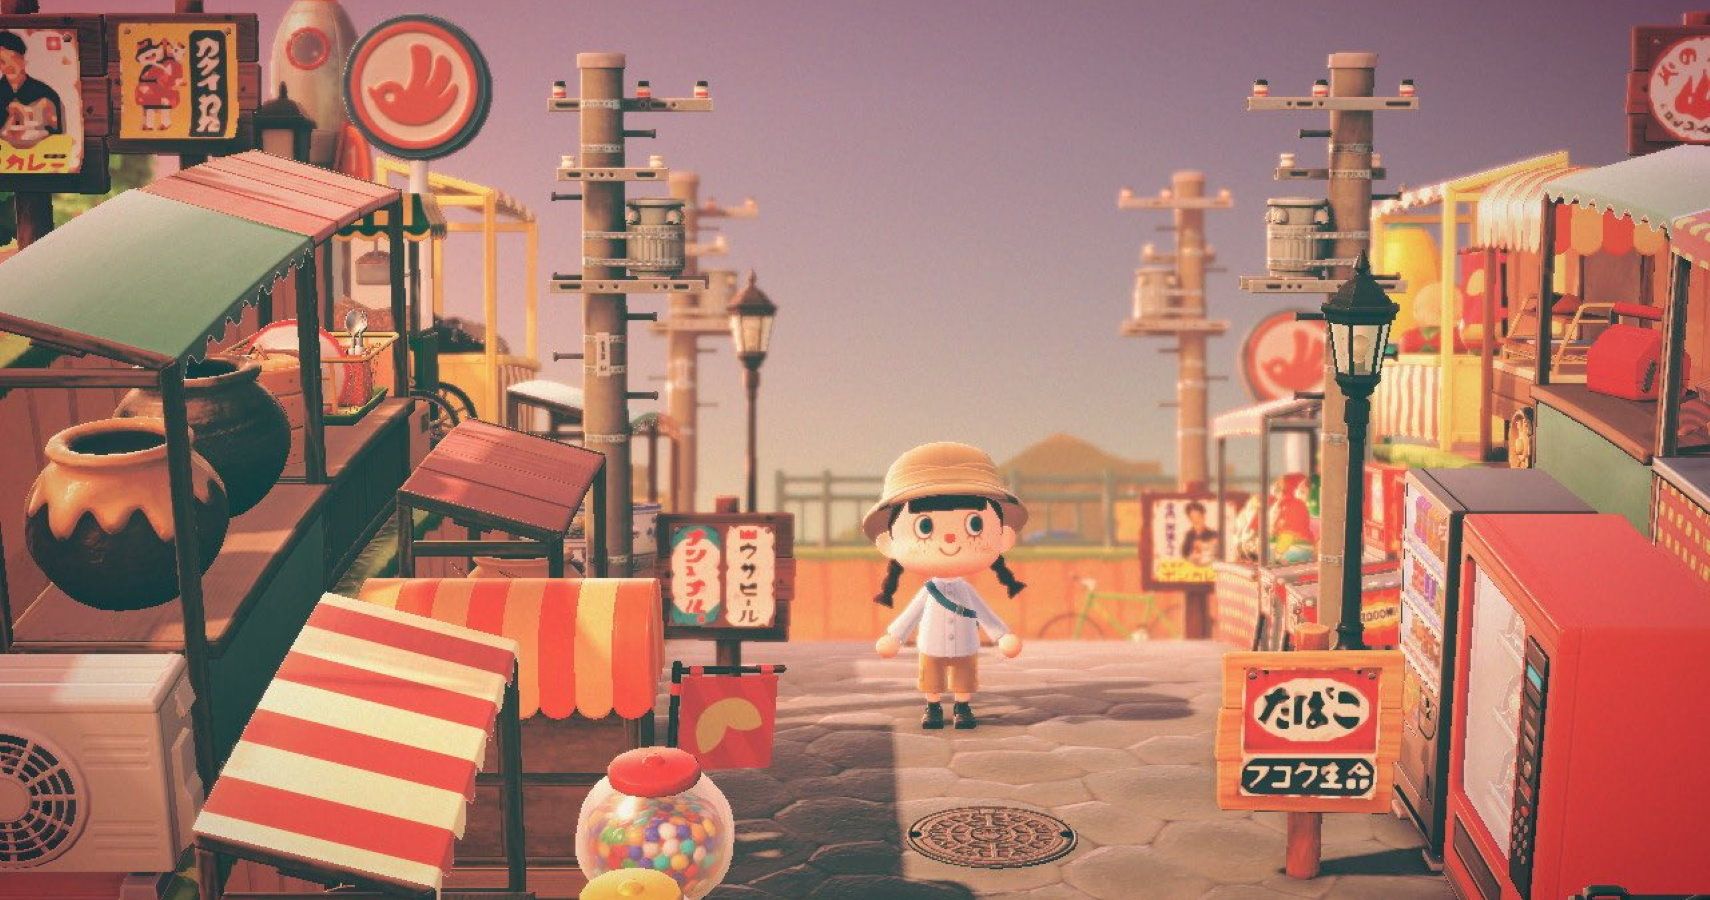 Talented Animal Crossing Designer Recreates a Quaint Japanese Shopping District On Her Island